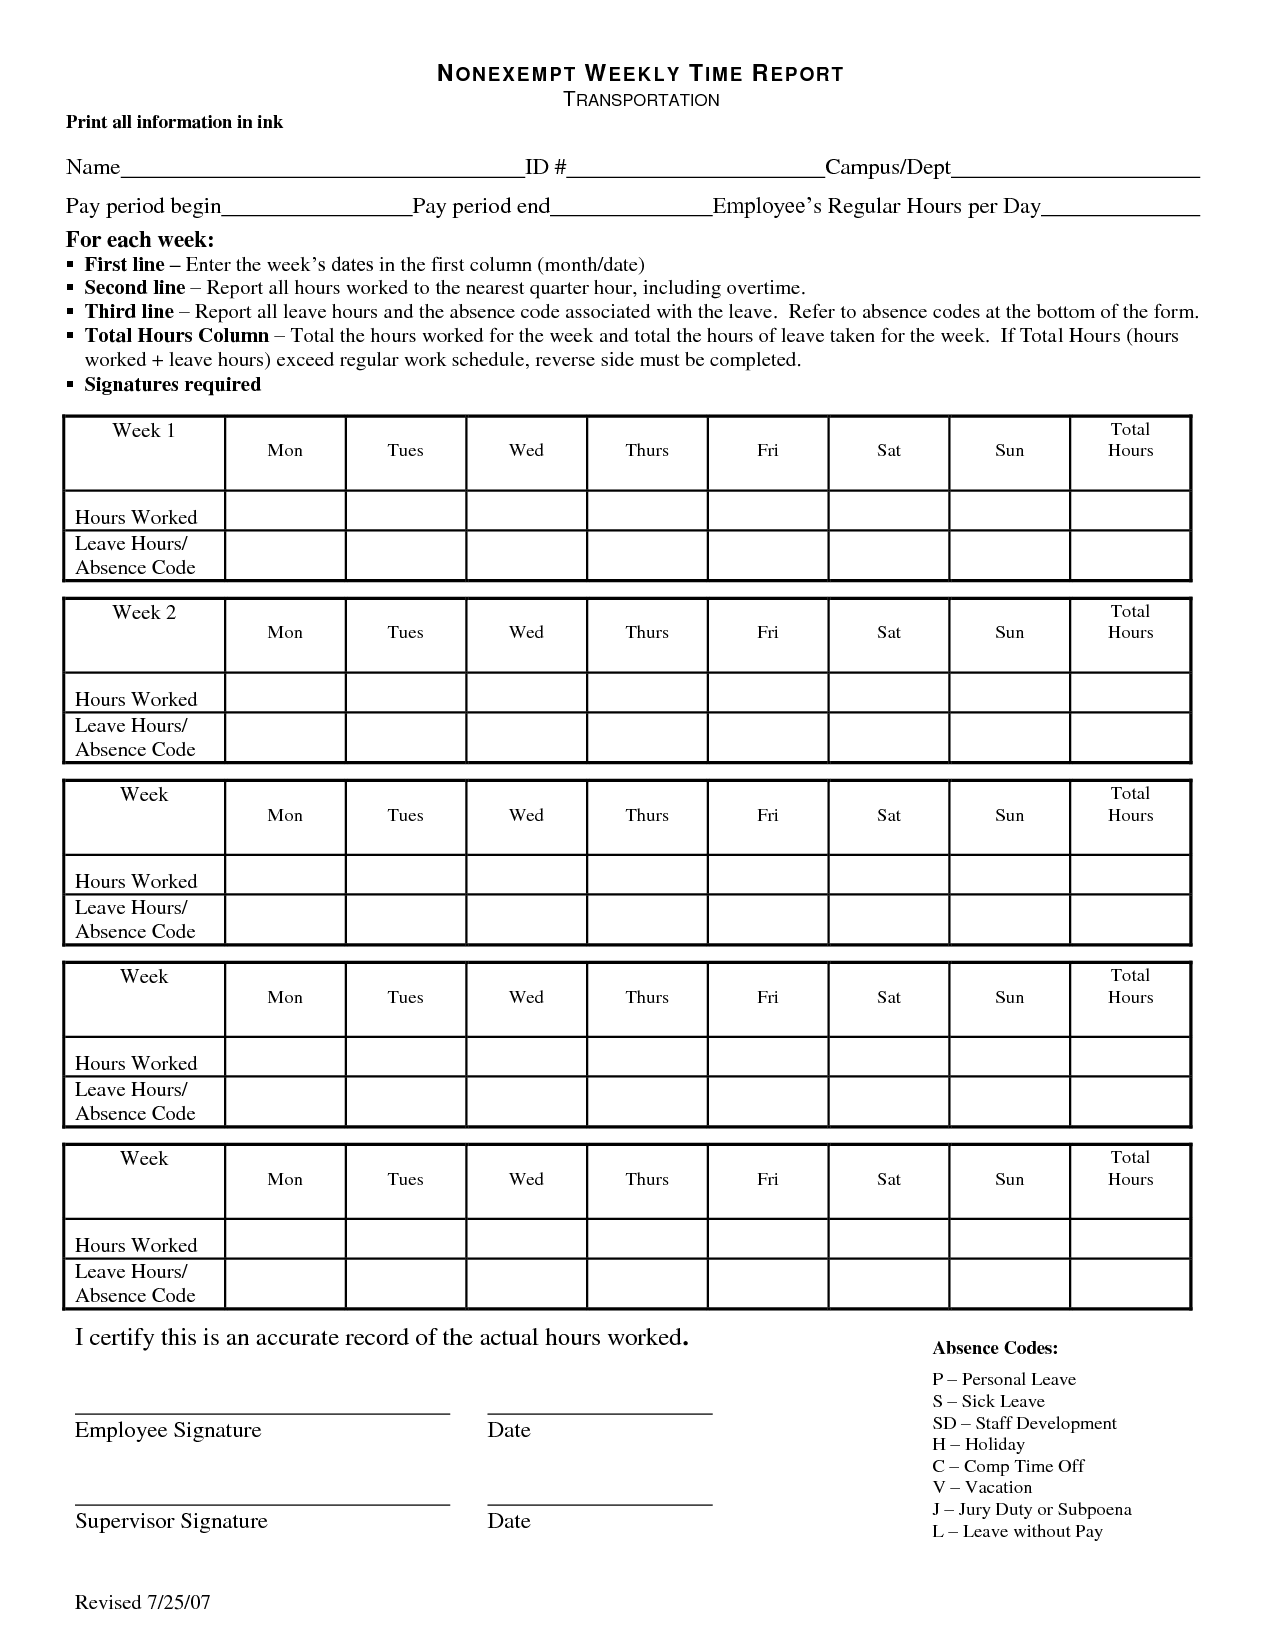 Transportation Schedule Template from www.printablee.com